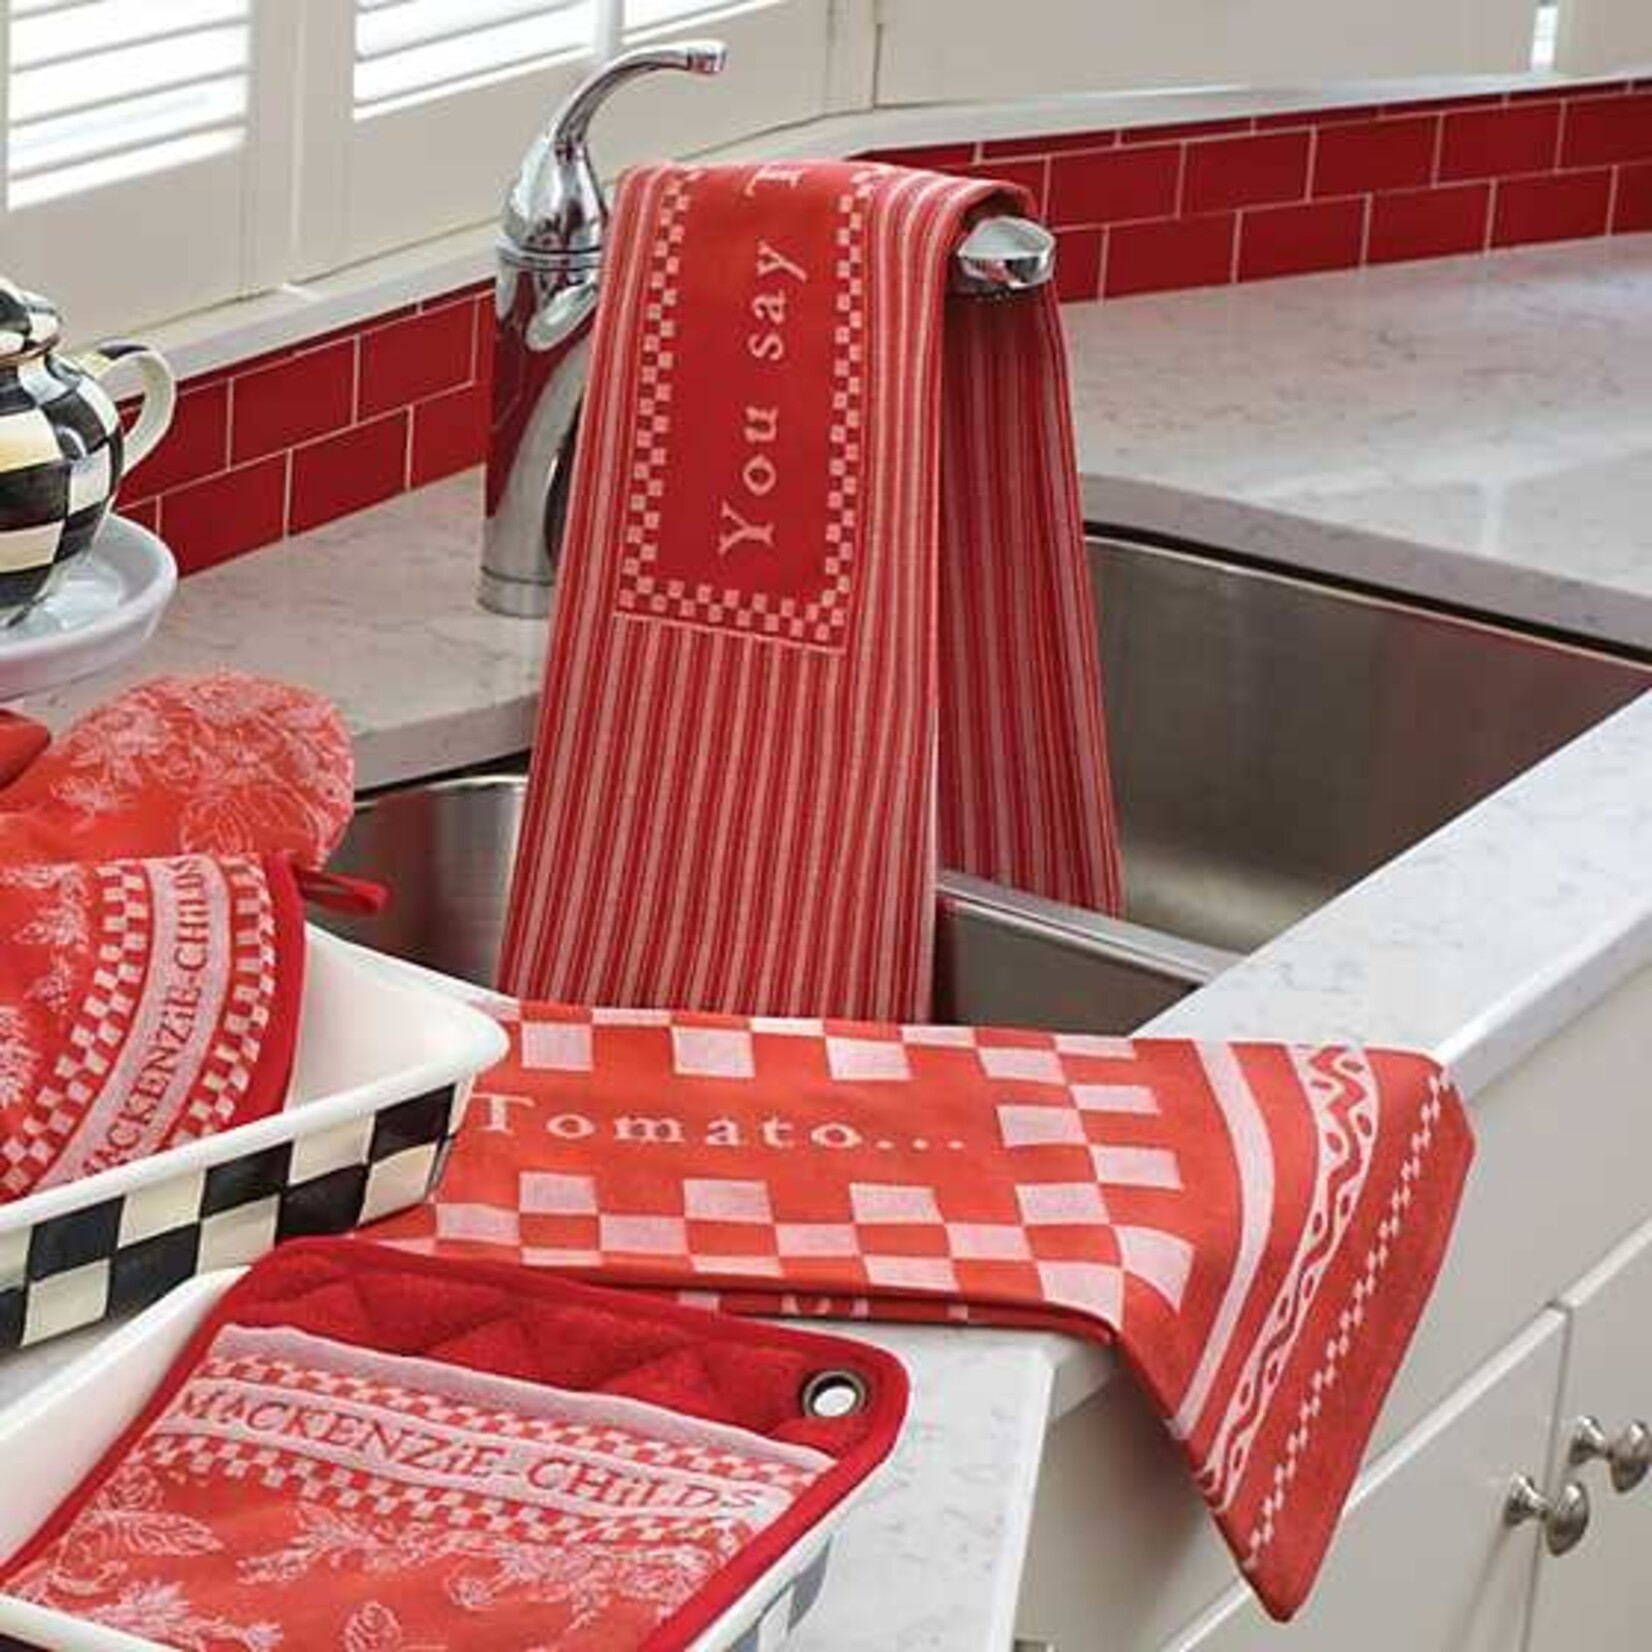 MacKenzie-Childs You Say Tomato Dish Towels - Set of 2